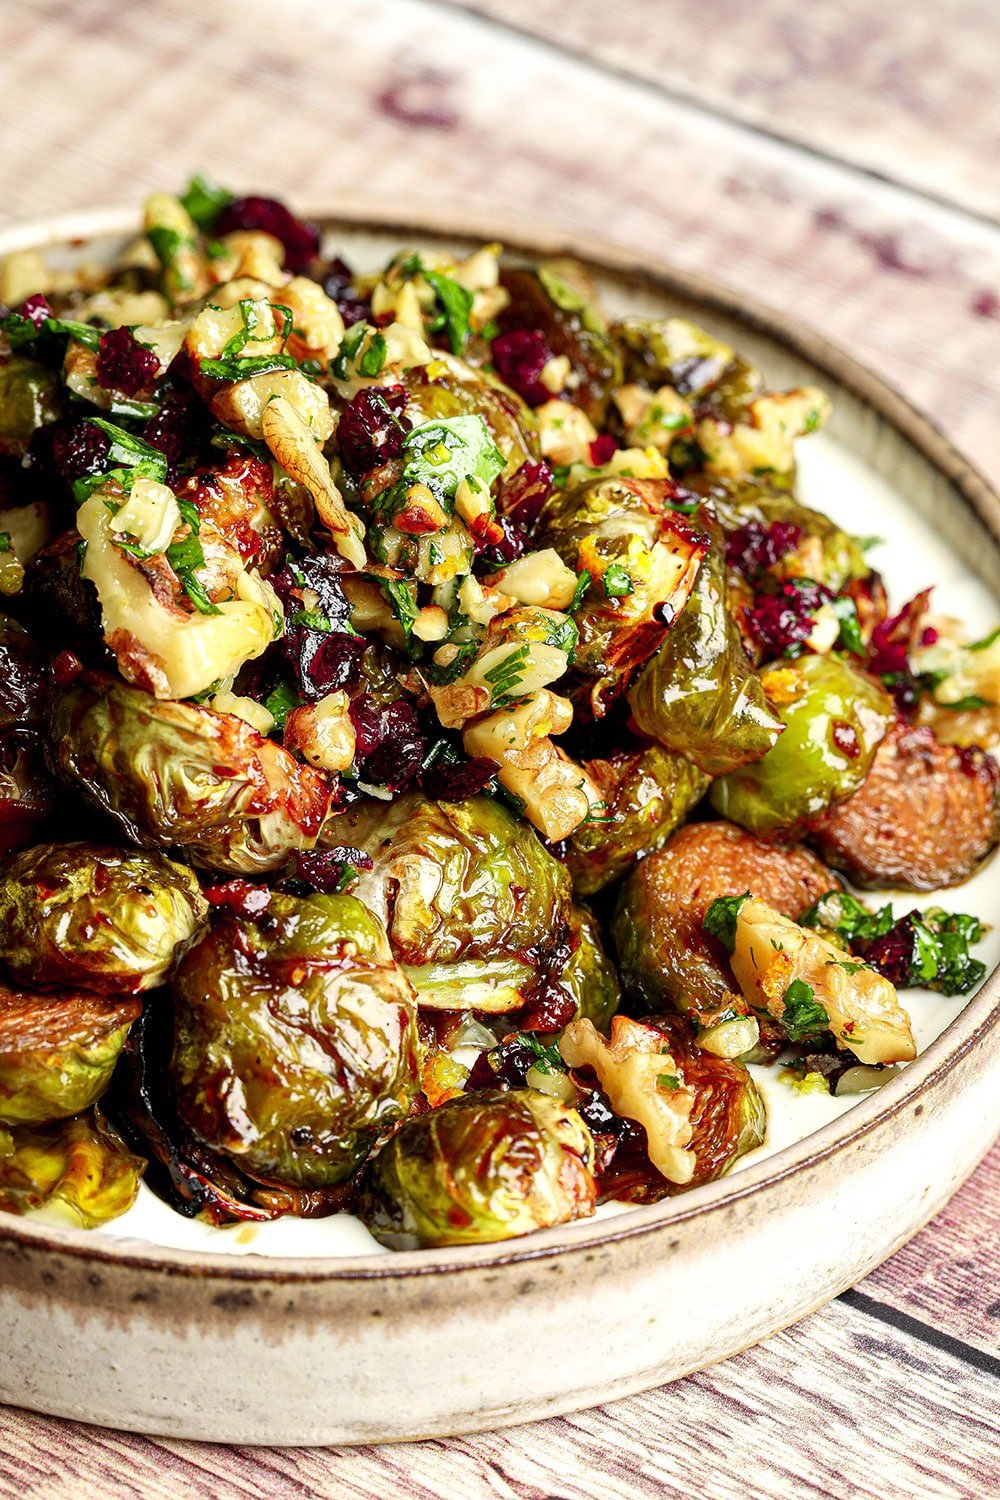 Pomegranate Molasses Roasted Brussels Sprouts